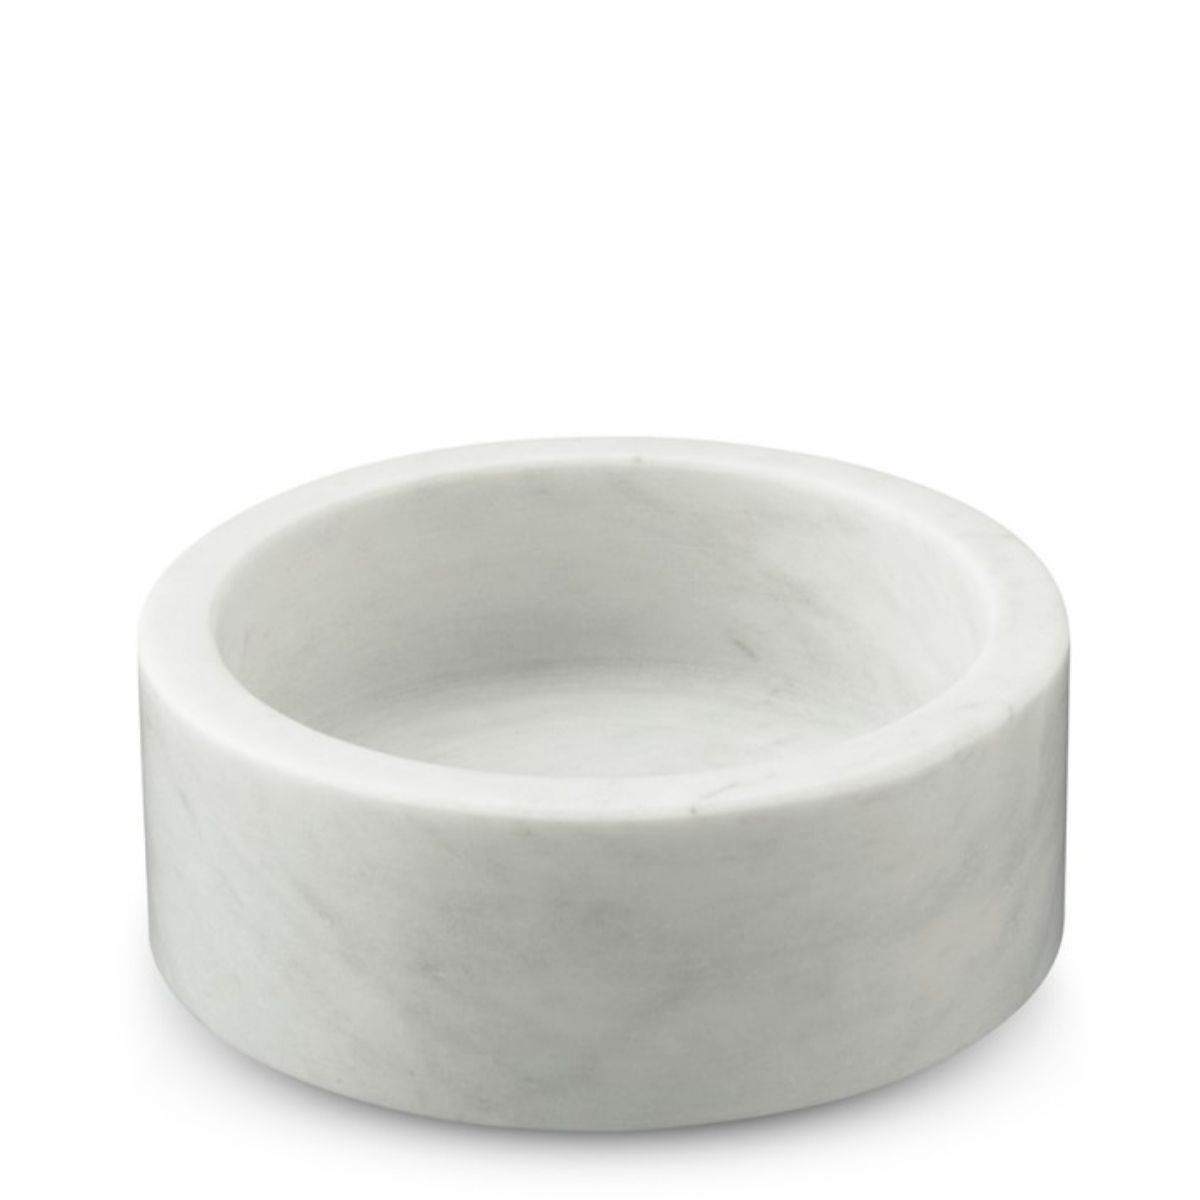 The Best Gifts for Wine Lovers Option: Marble Wine Coaster